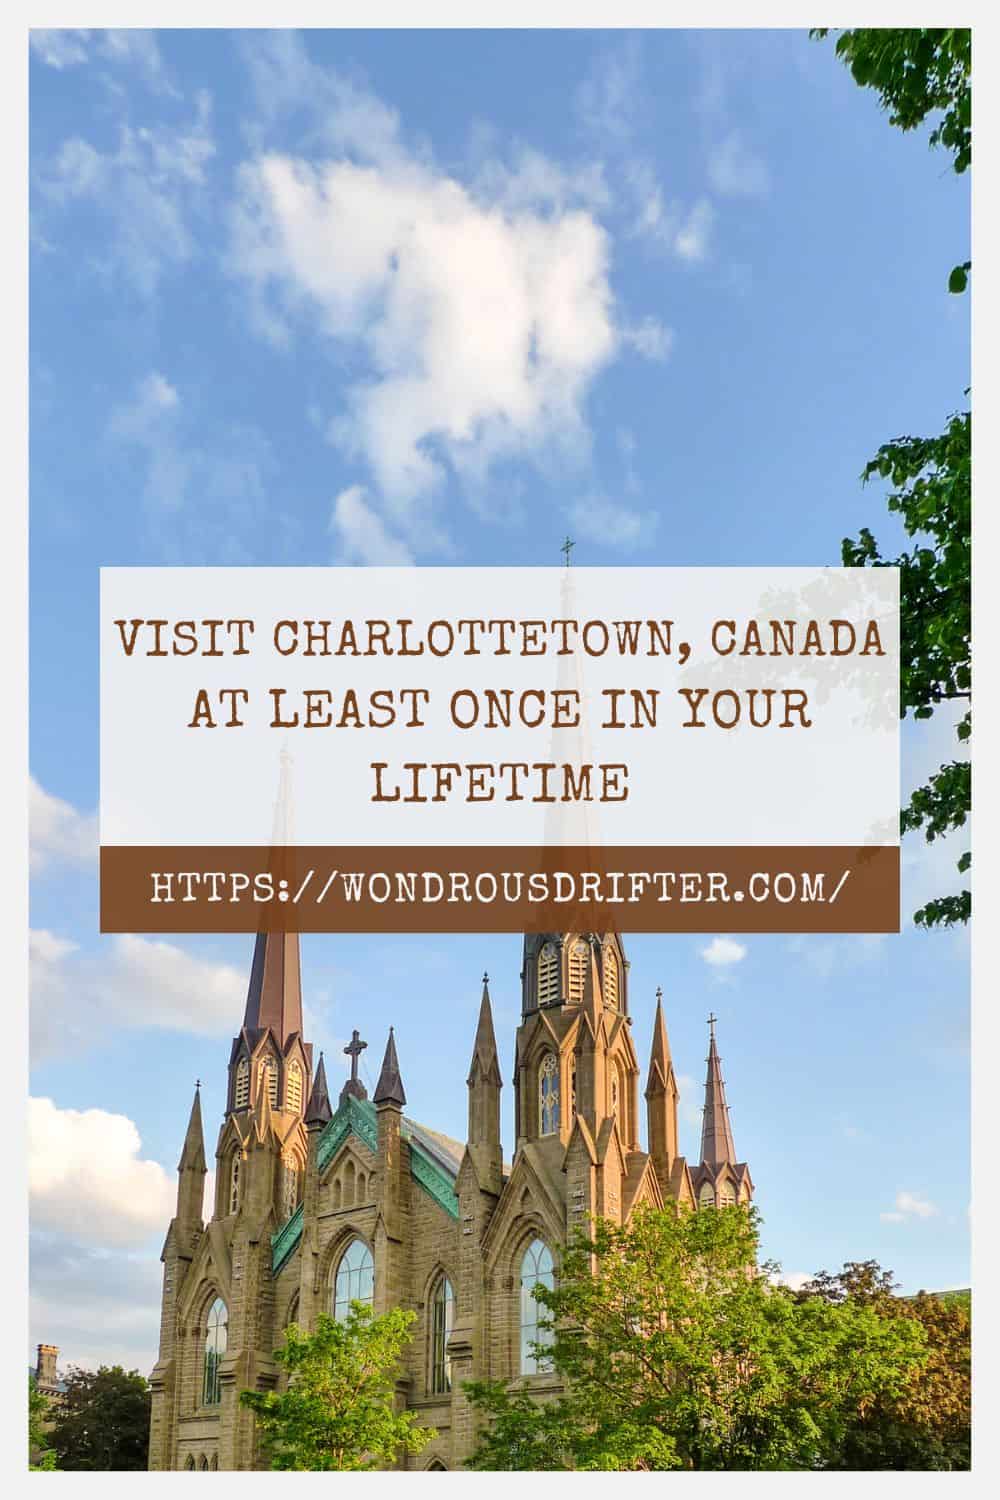 Visit Charlottetown Canada at least once in your lifetime